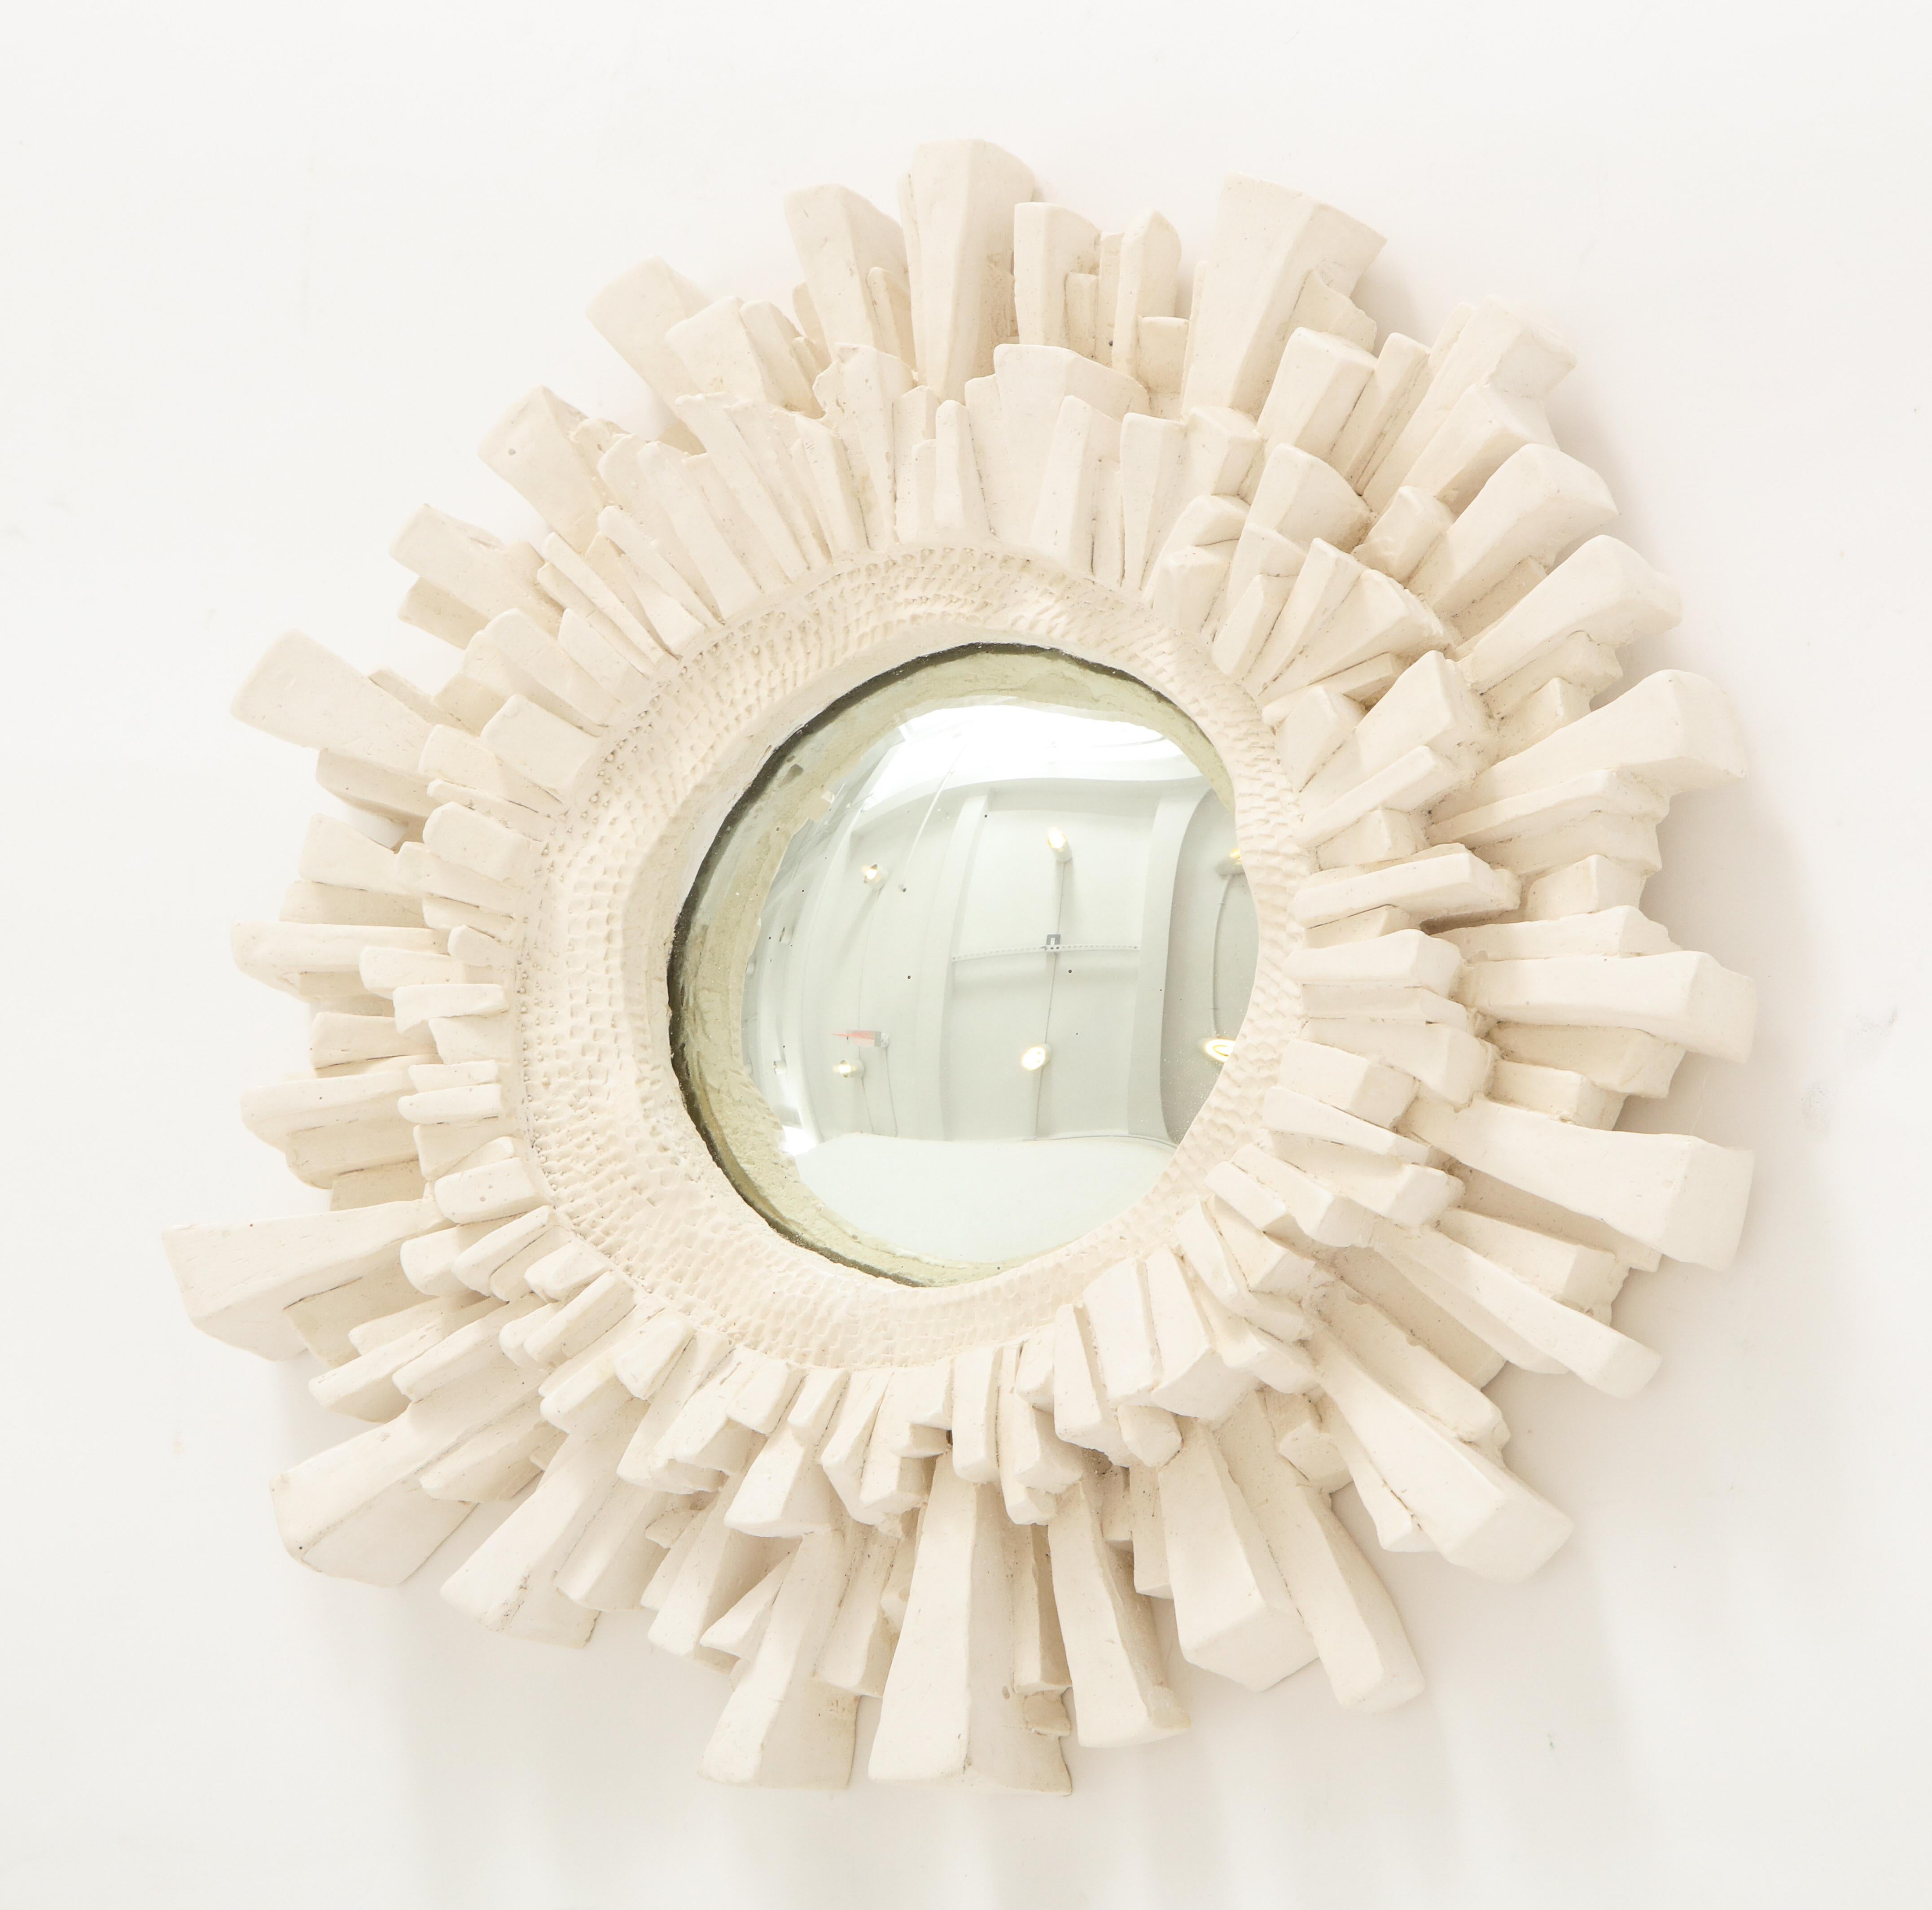 Contemporary A Carved Plaster Mirror